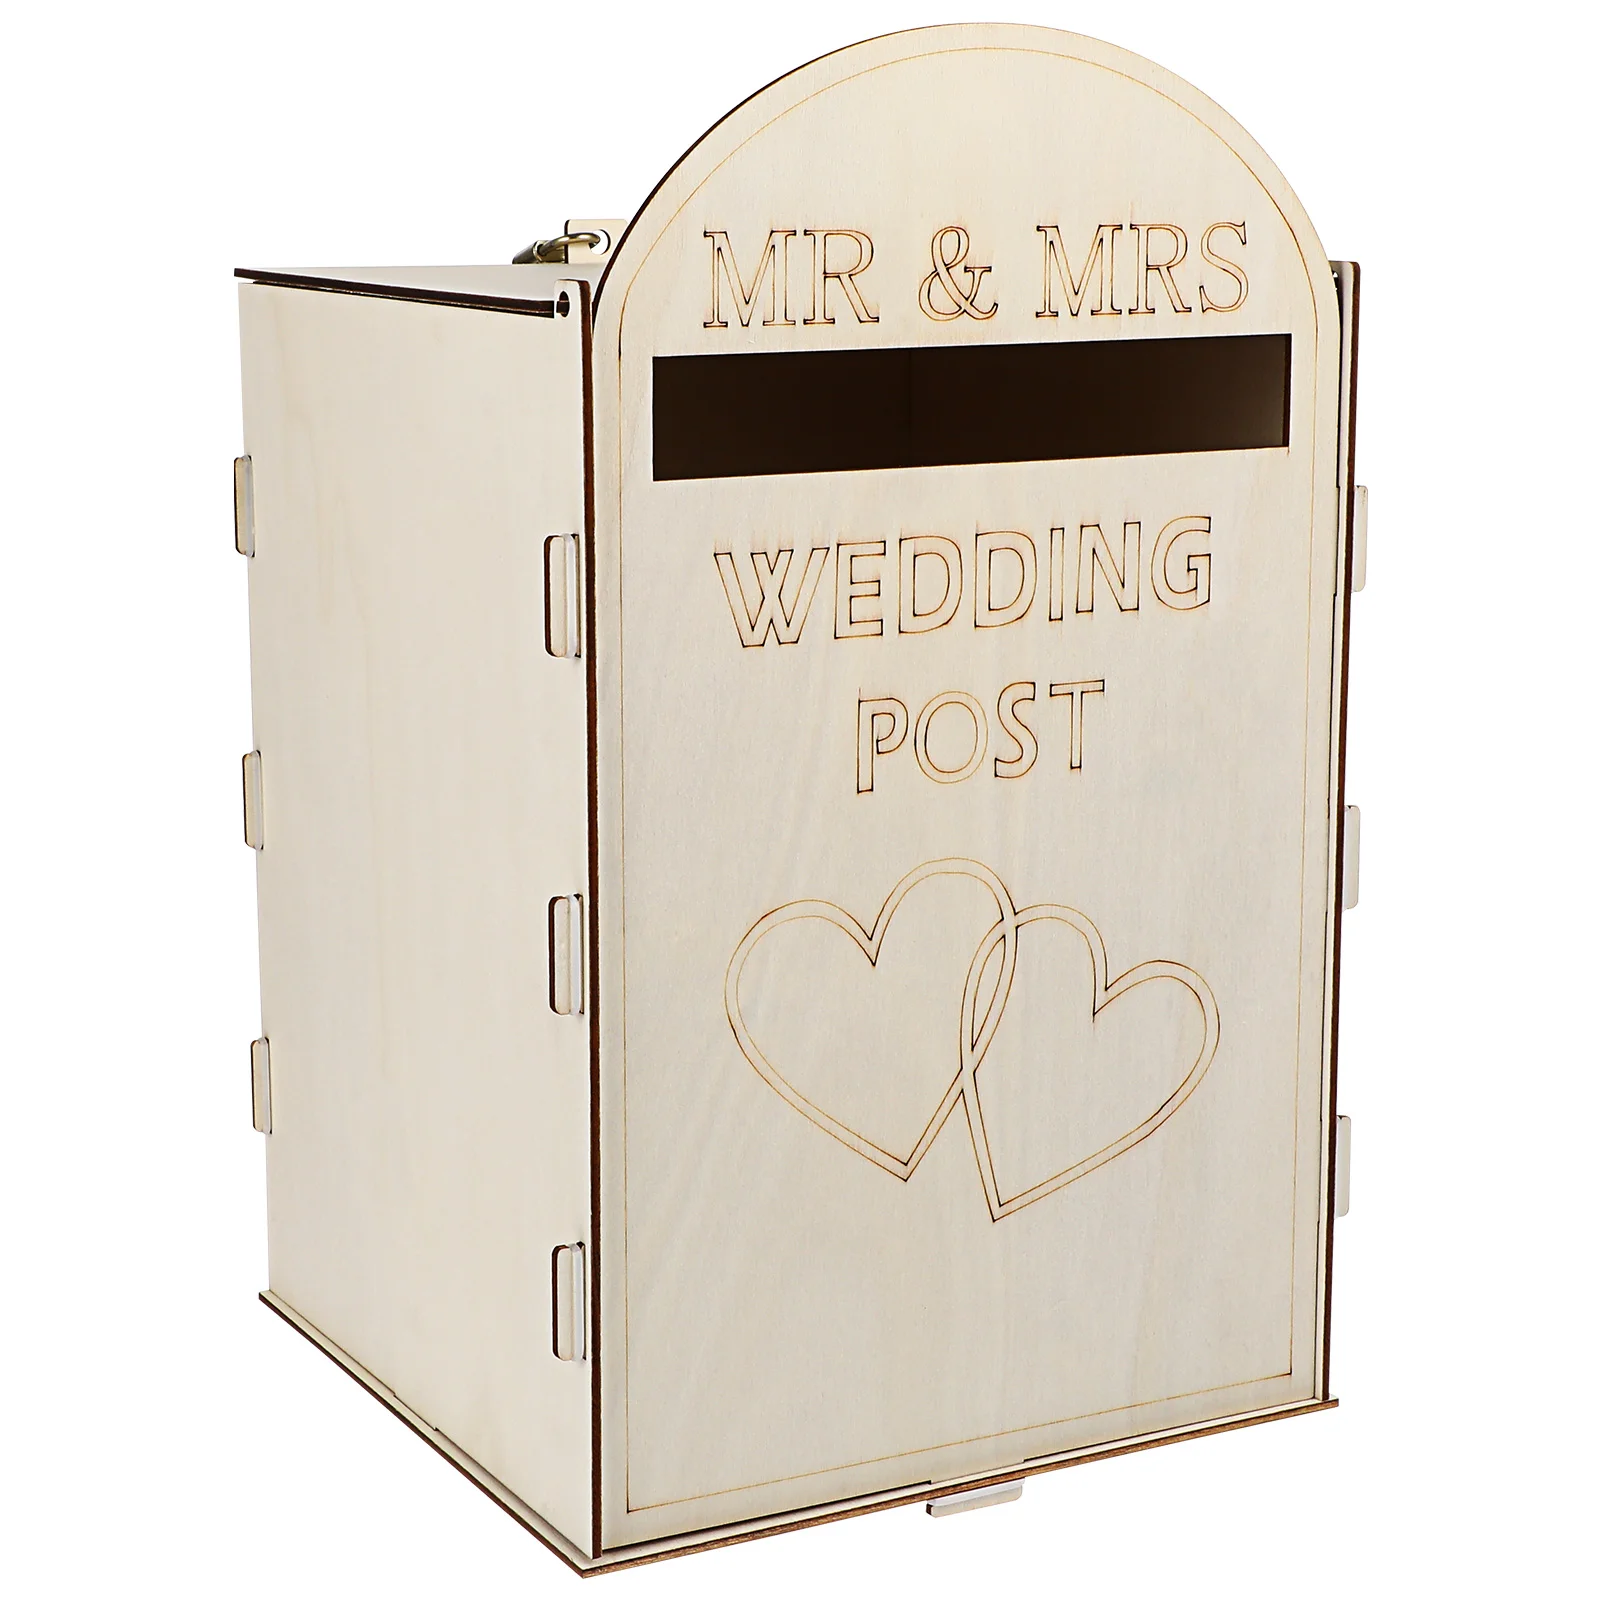 Wedding Post Box DIY Wooden Wedding Supplies Gift Envelope Card Box Suggestion Letter Donation Wedding Party Favors Decoration